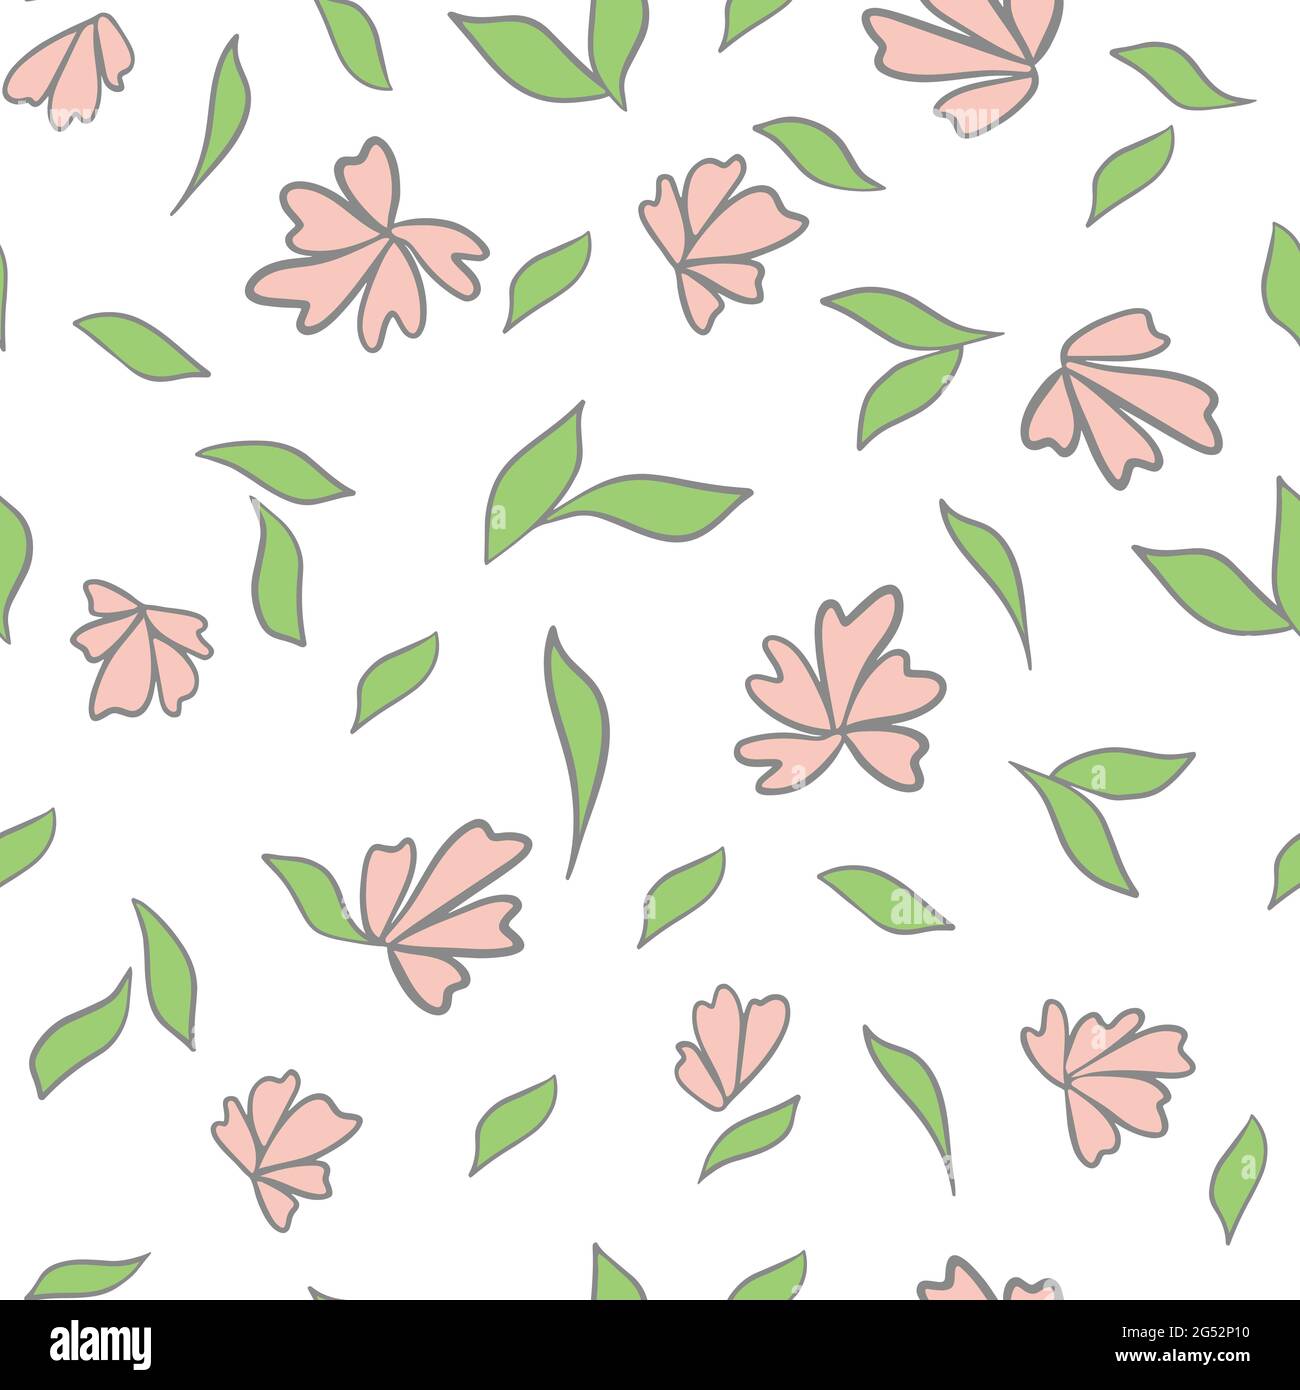 Flowers and leaves, vector pattern. Illustration of floral and leafy pattern. Botanical natural minimalistic background. Hand drawing. Stock Vector